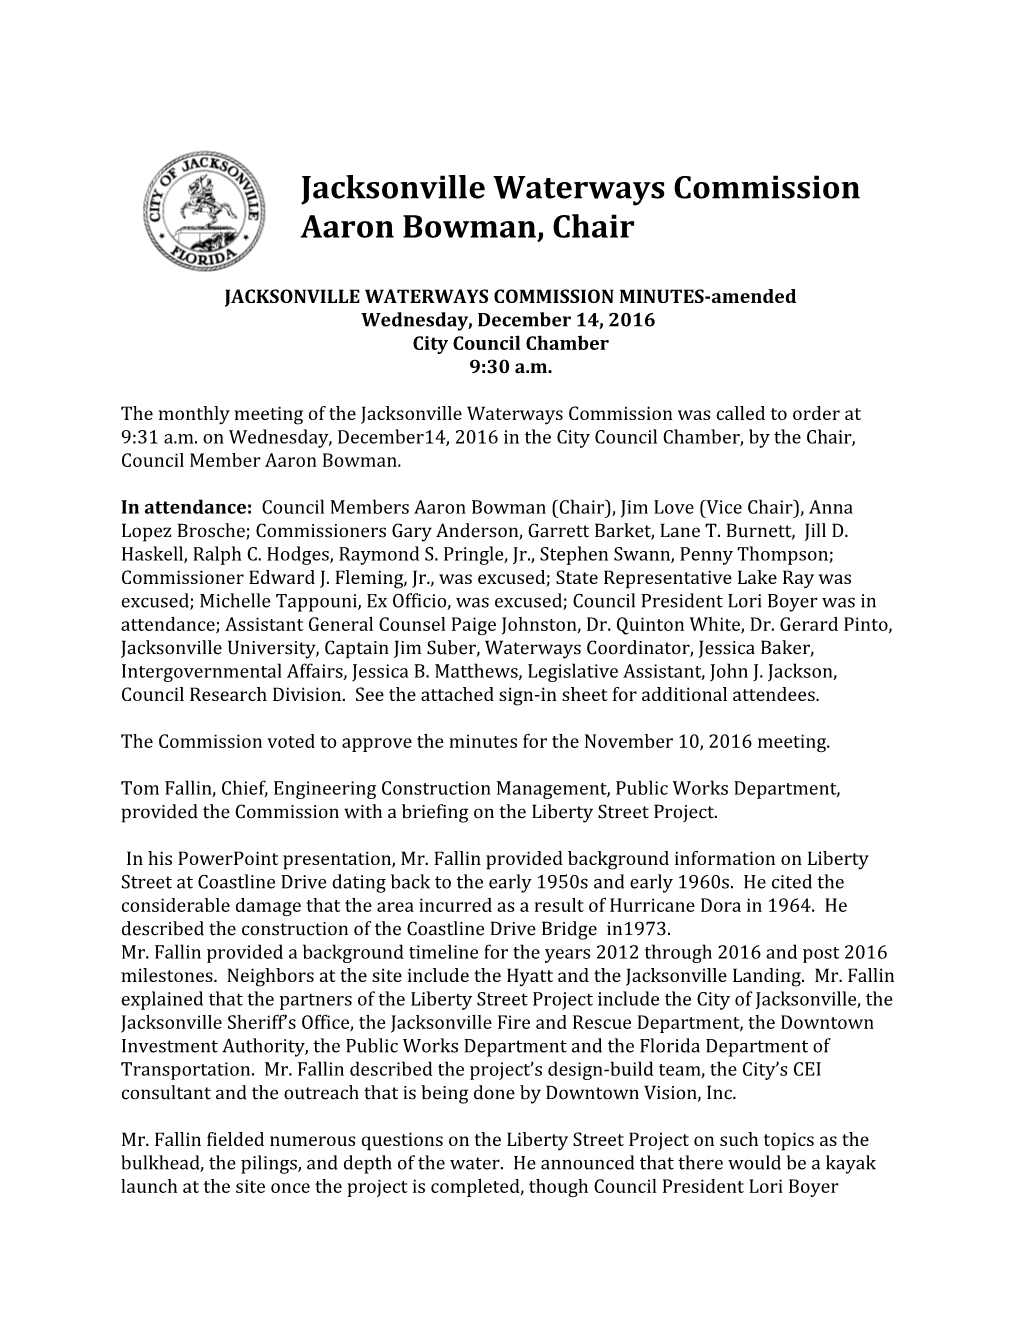 JACKSONVILLE WATERWAYS COMMISSION MINUTES-Amended